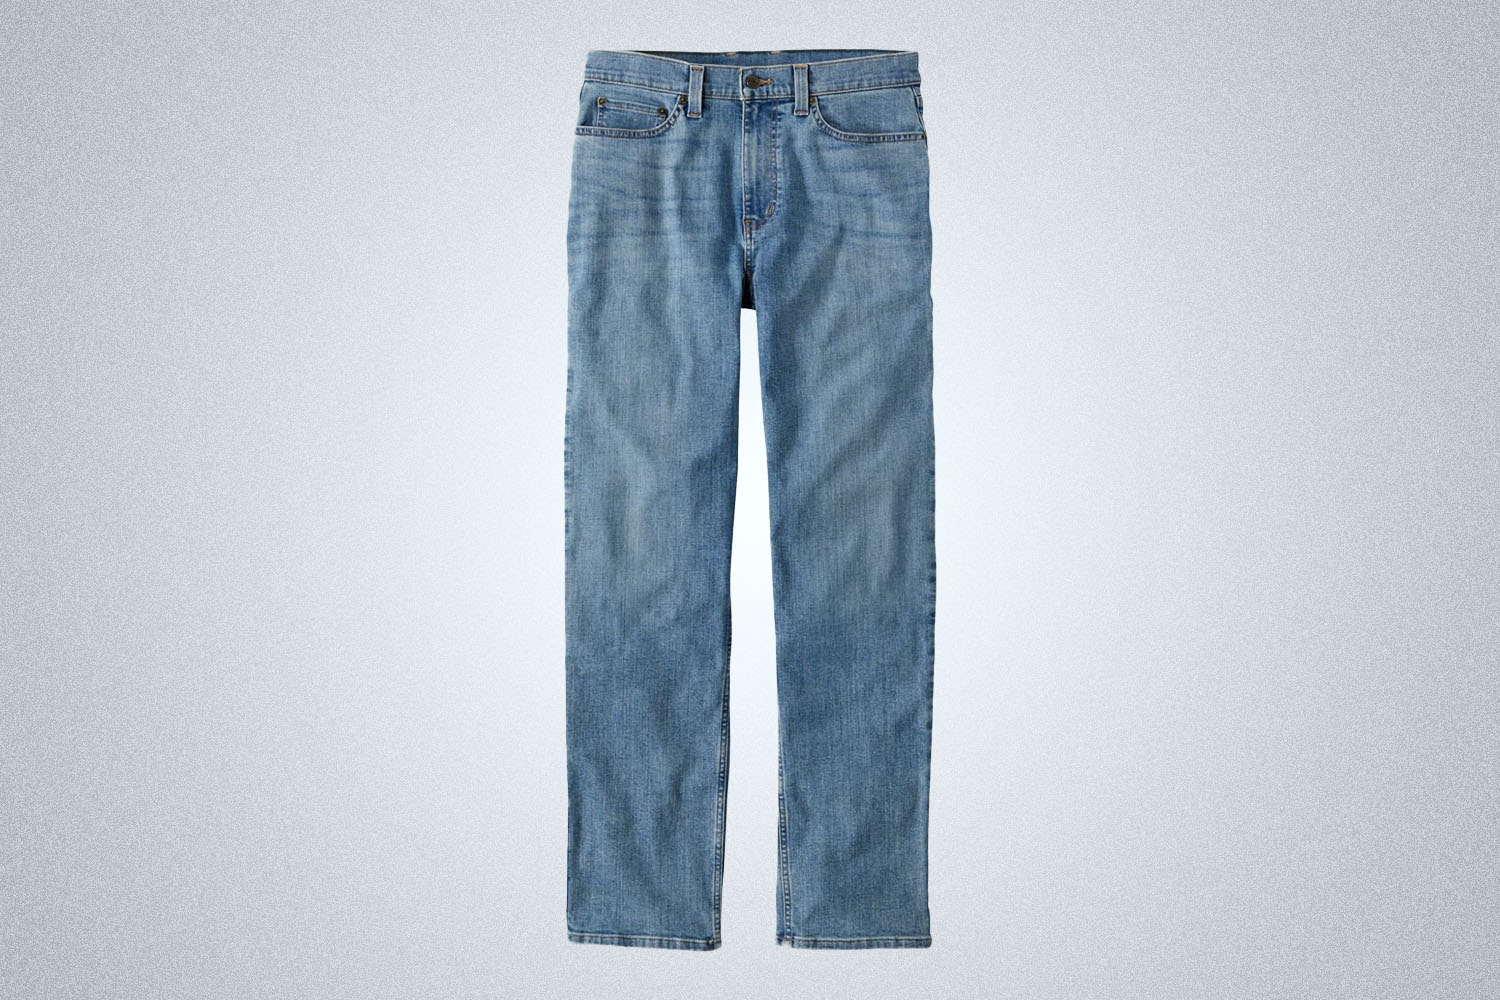 a pair of light wash jeans